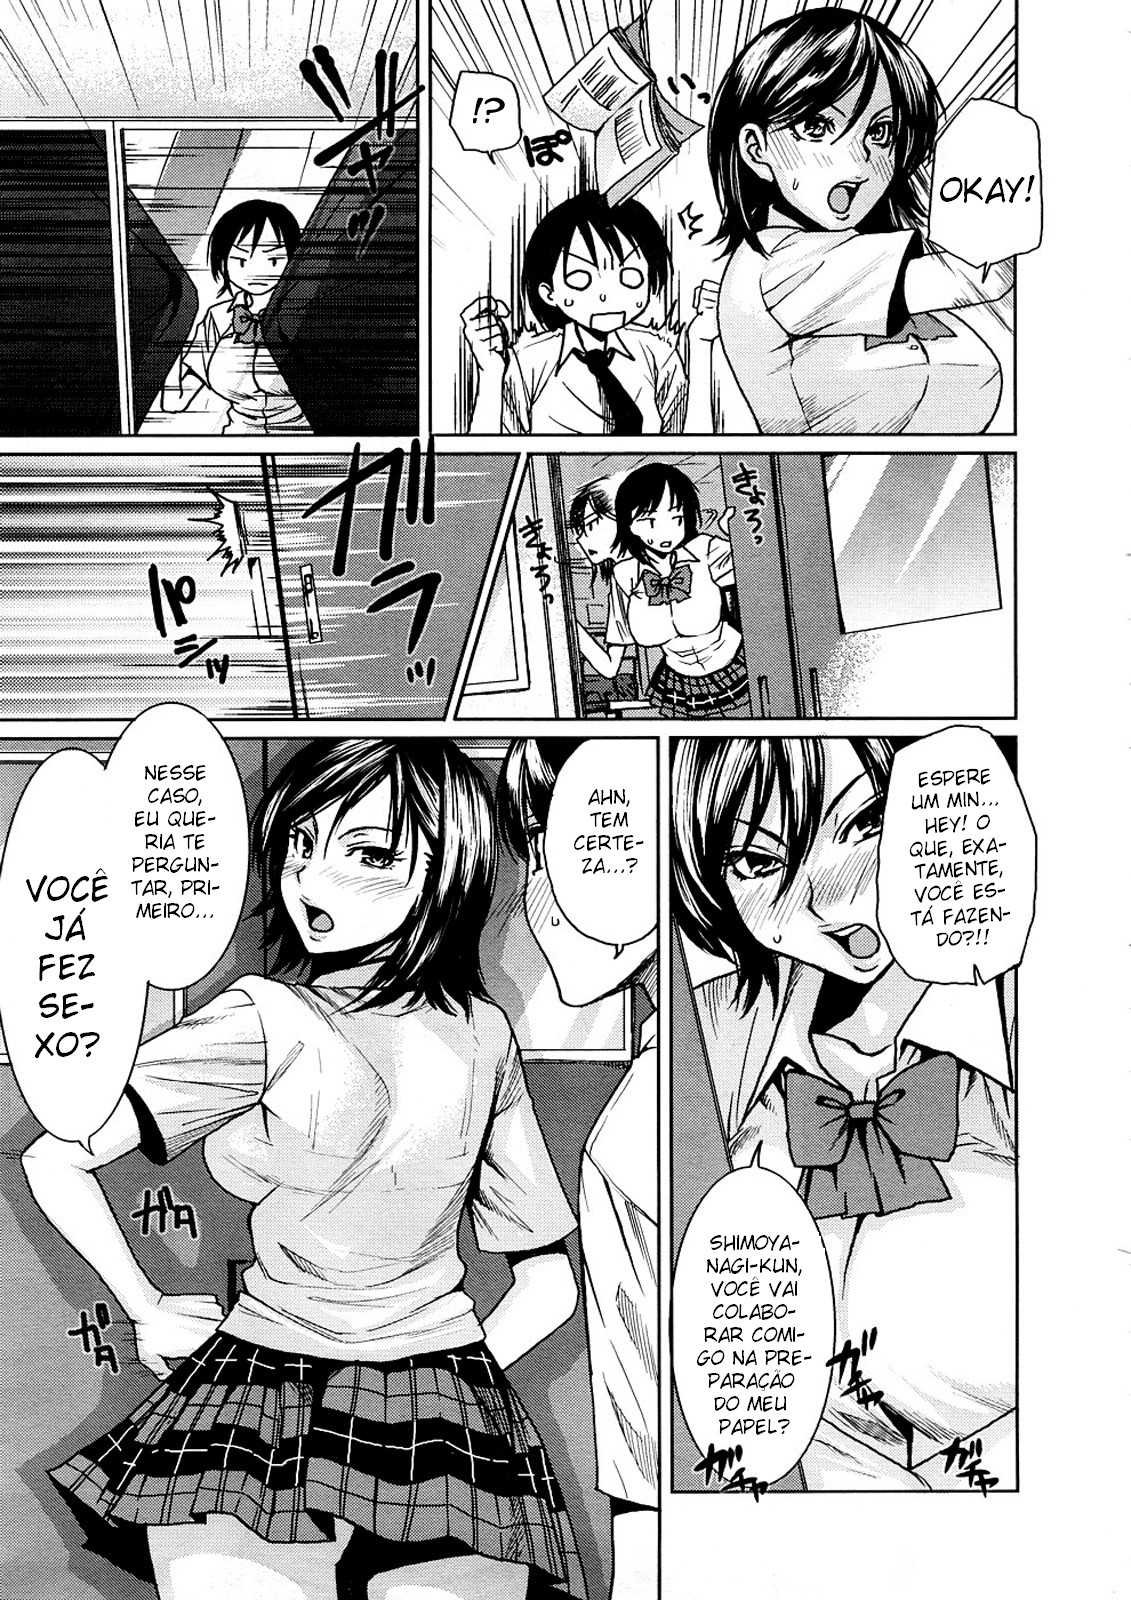 [Ooshima Ryou] A Day in the Life of the Theater Club Ch.1 [Portuguese-BR] 